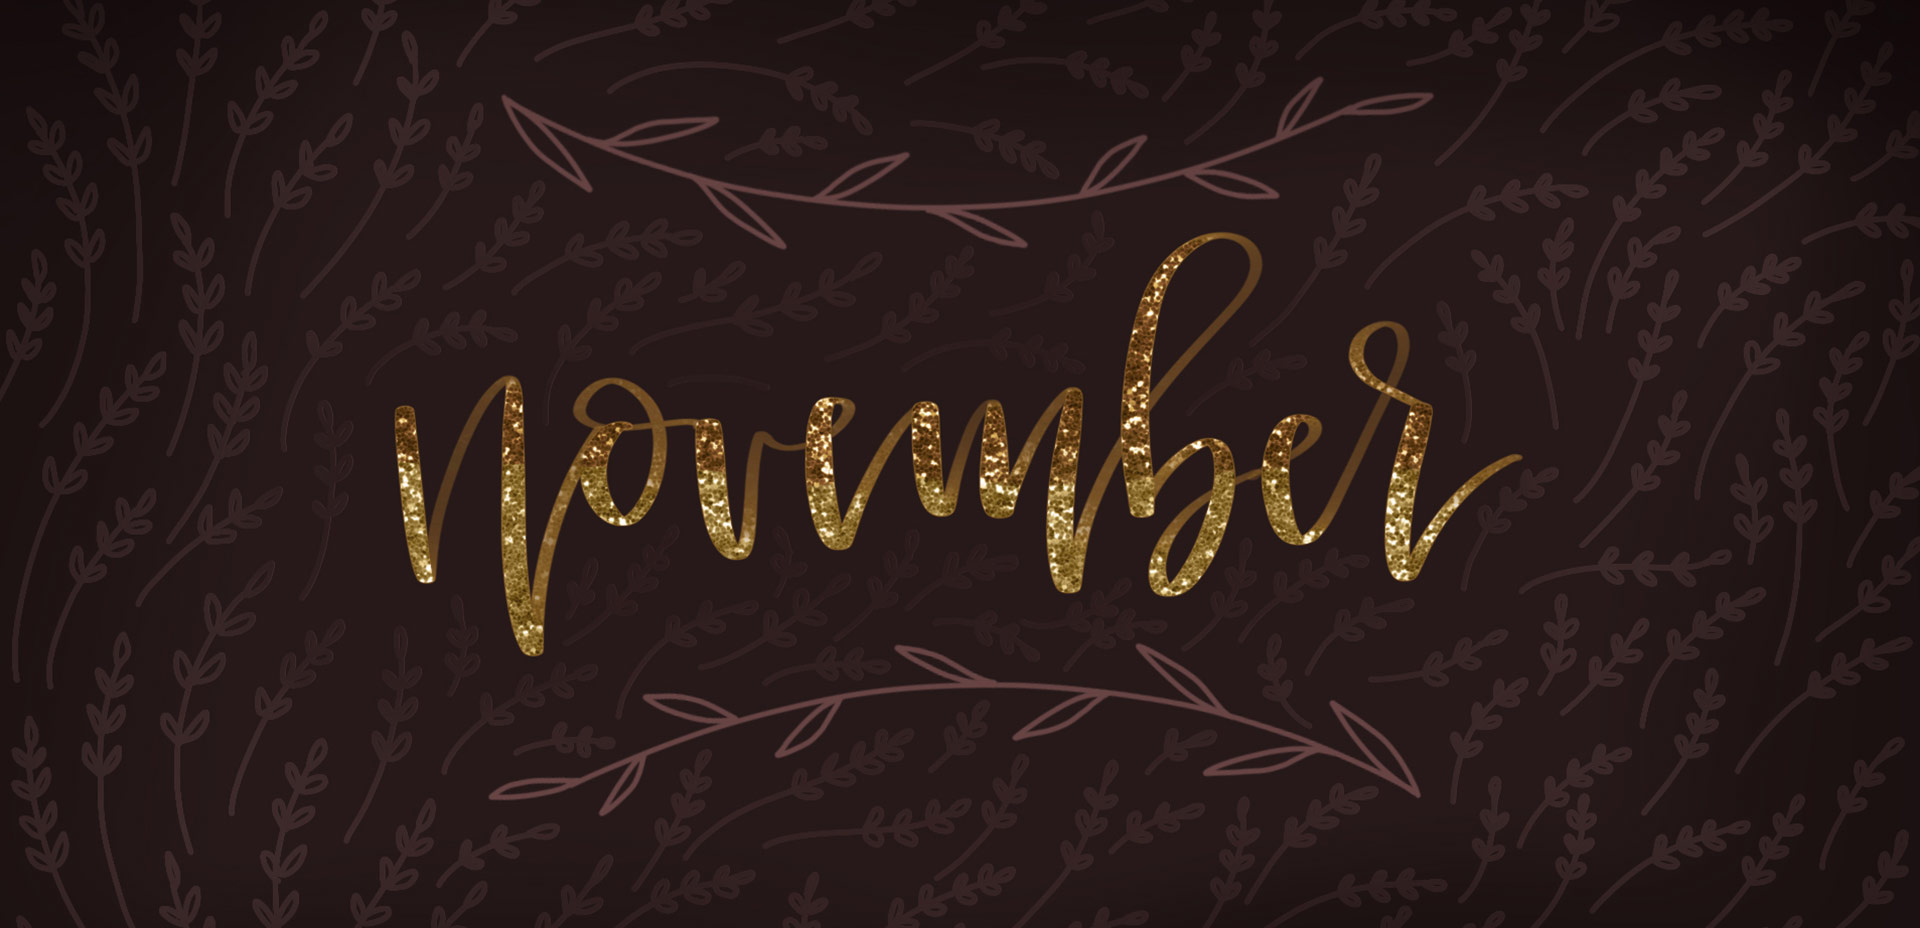 November Wallpapers High Quality Download Free